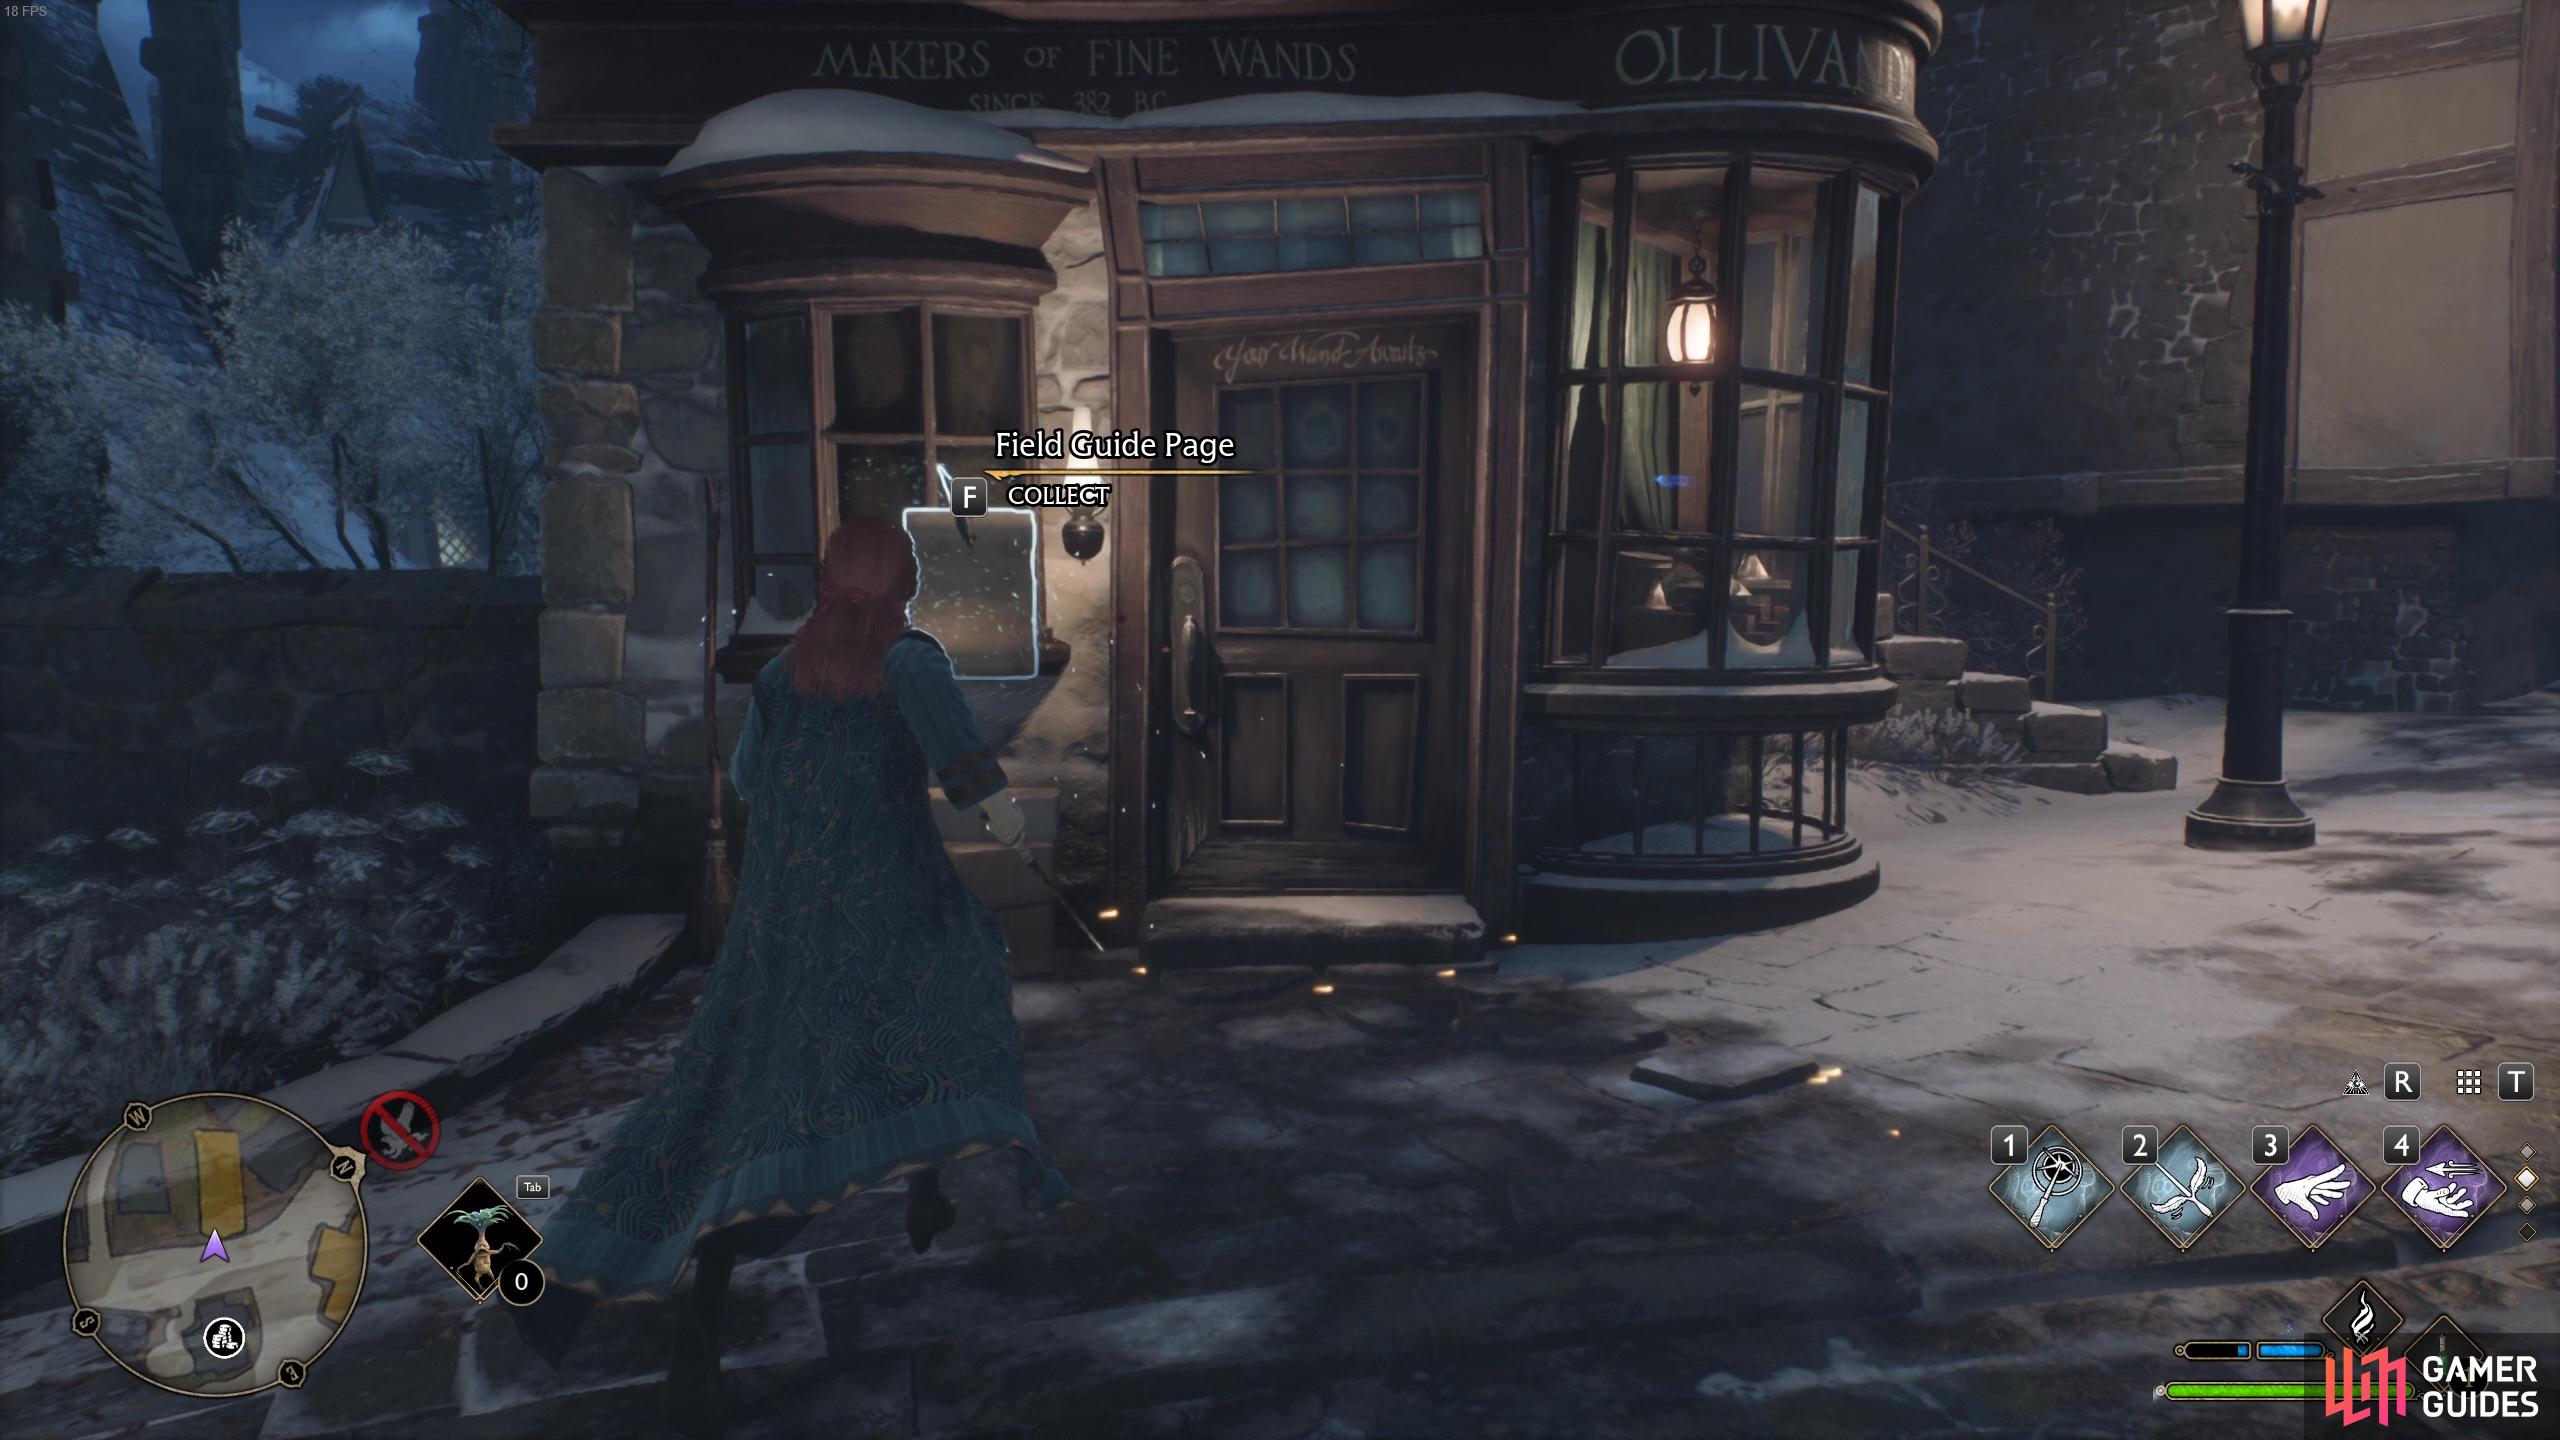 A field guide page can be found outside Ollivander’s Wand Shop. 